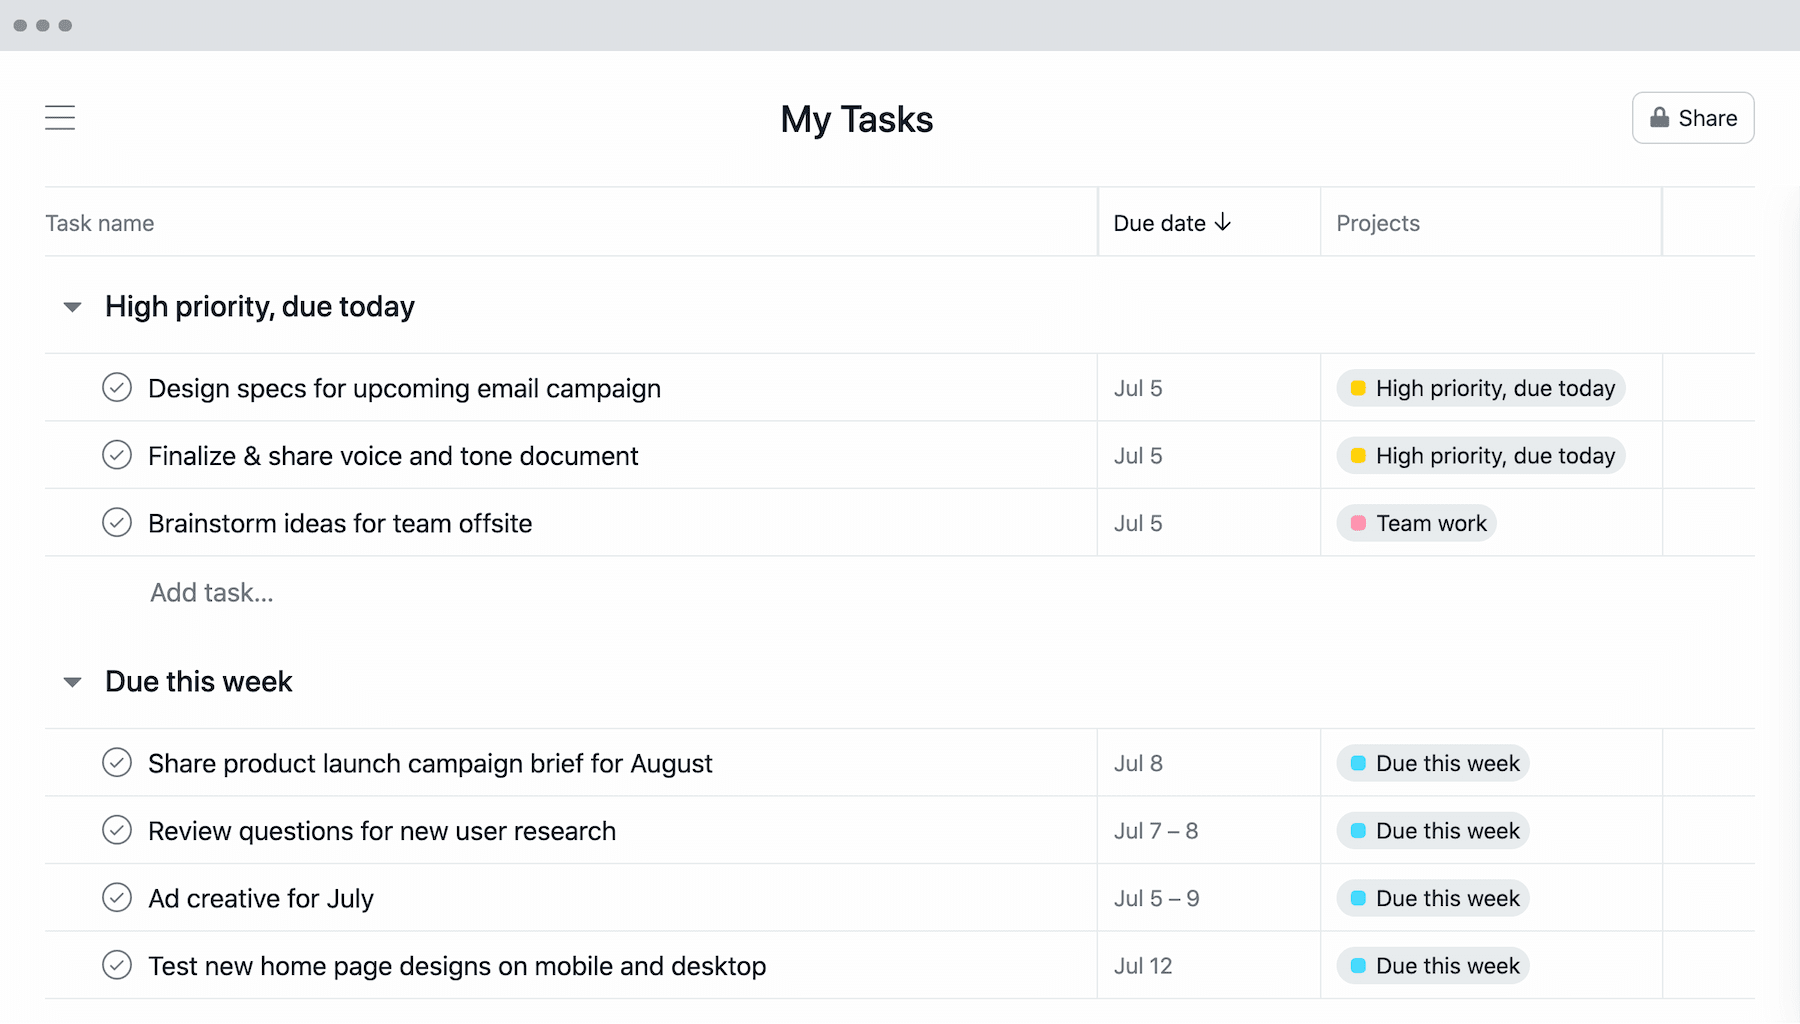 [Old Product UI] Organized GTD method in My Tasks project in Asana with priority, date, and project-level information (Lists)